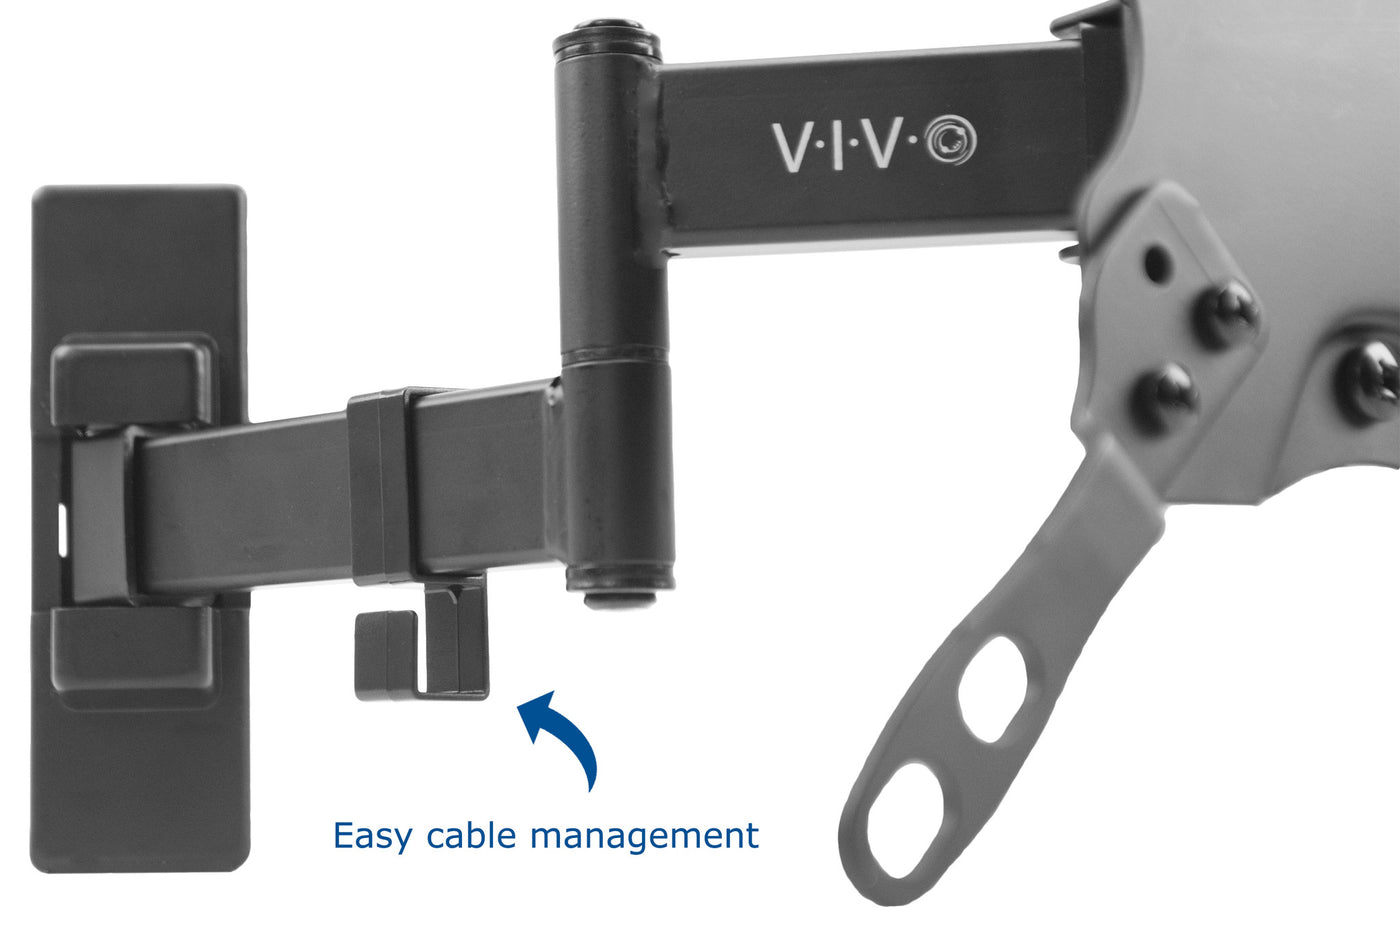 Sturdy adjustable TV wall mount with cable management.